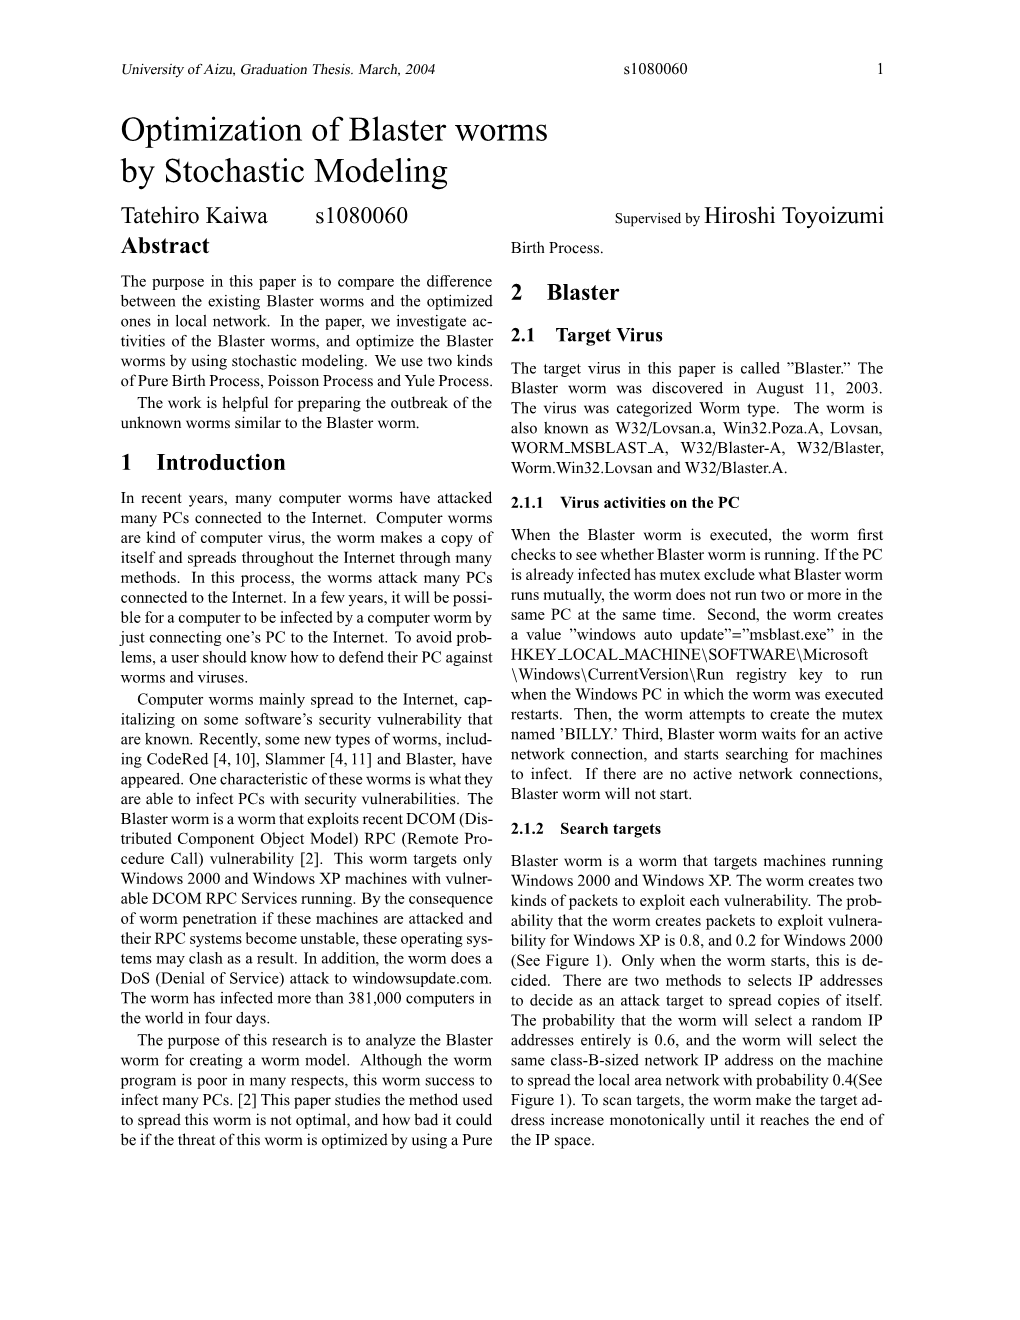 Optimization of Blaster Worms by Stochastic Modeling